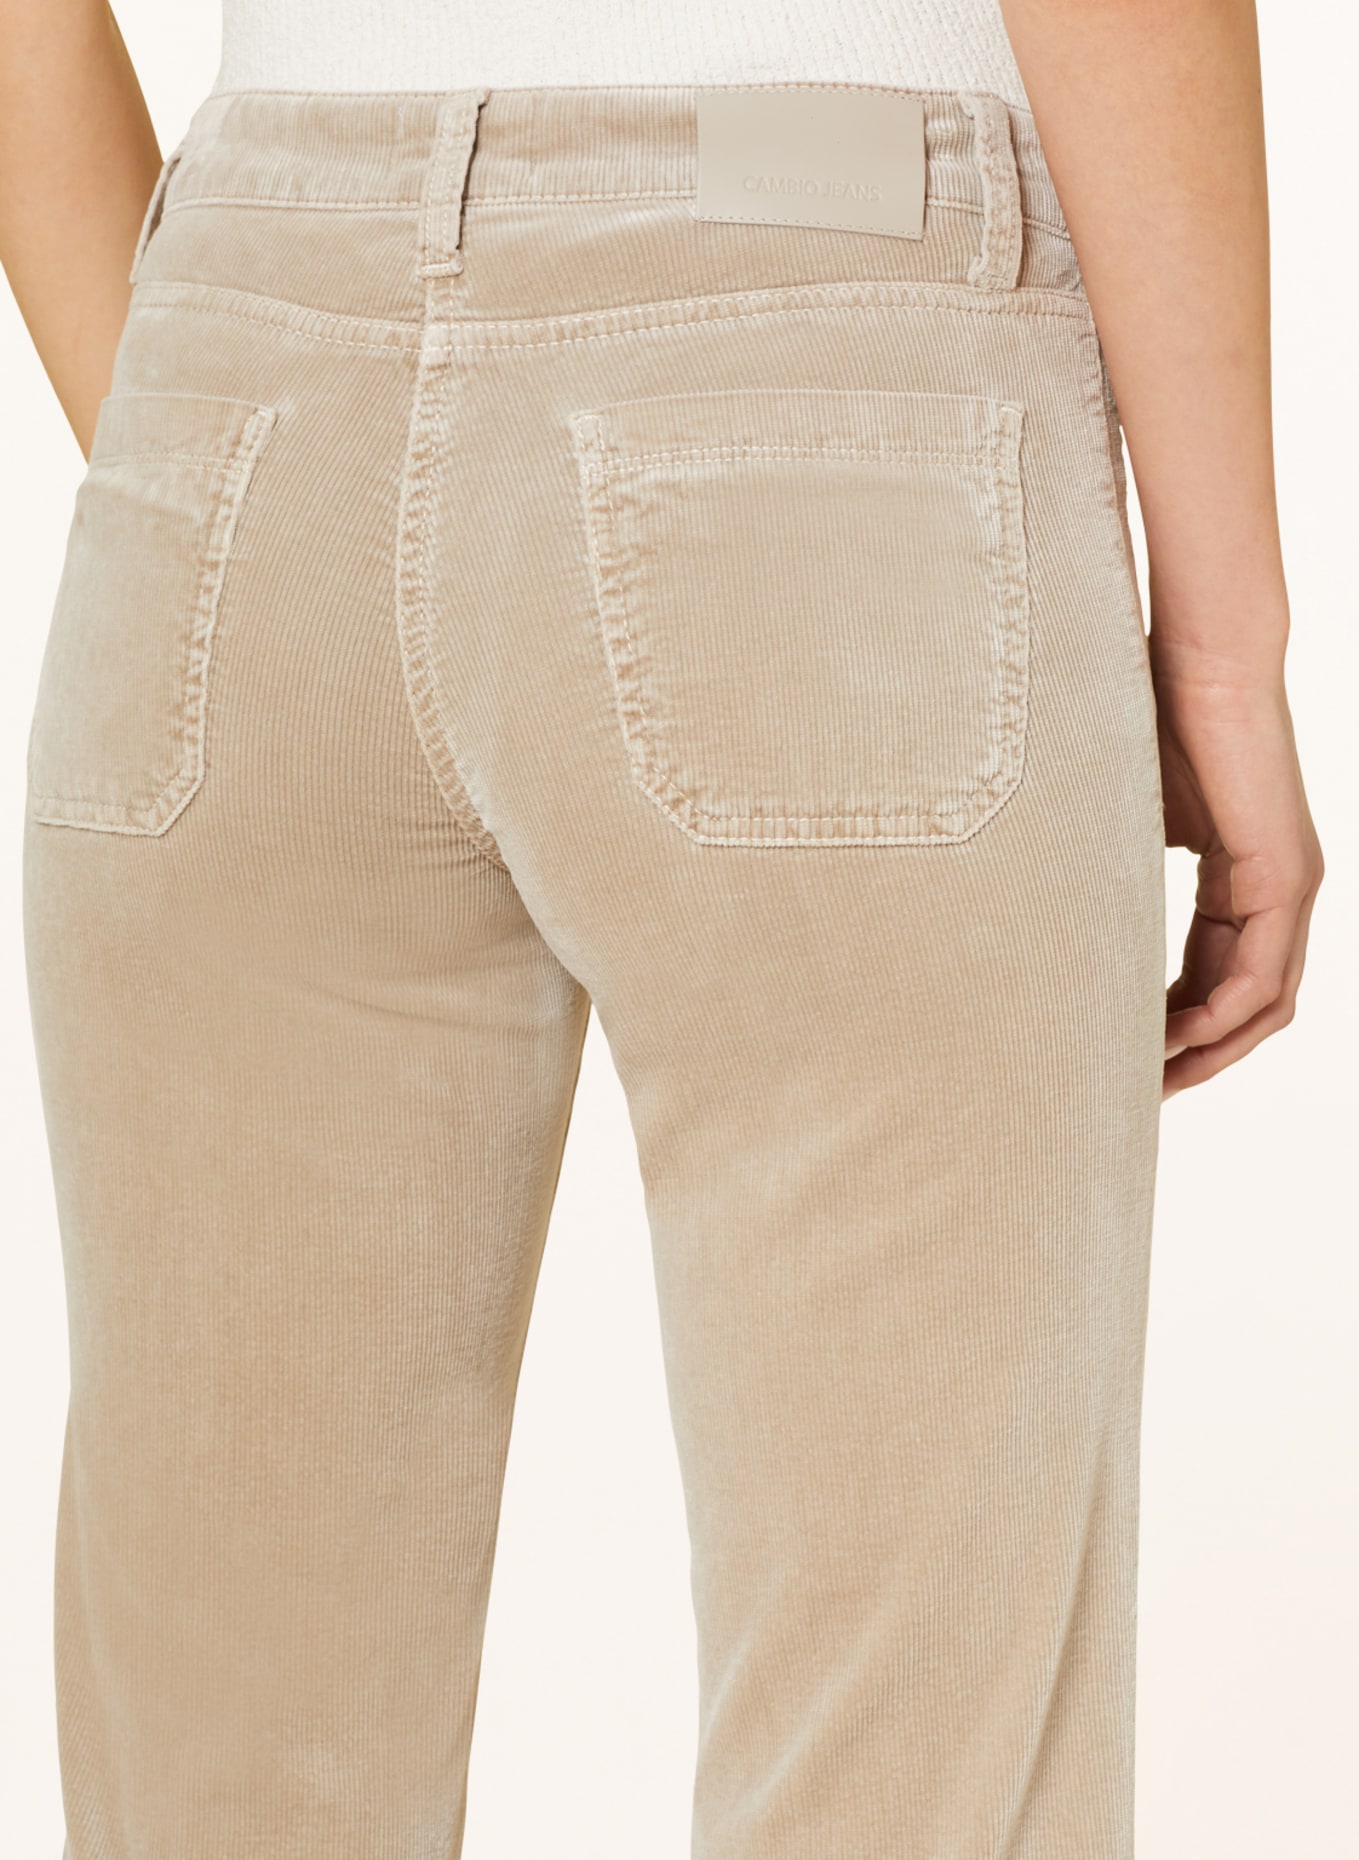 CAMBIO 7/8 corduroy trousers TESS, Color: 067 simply taupe (Image 5)